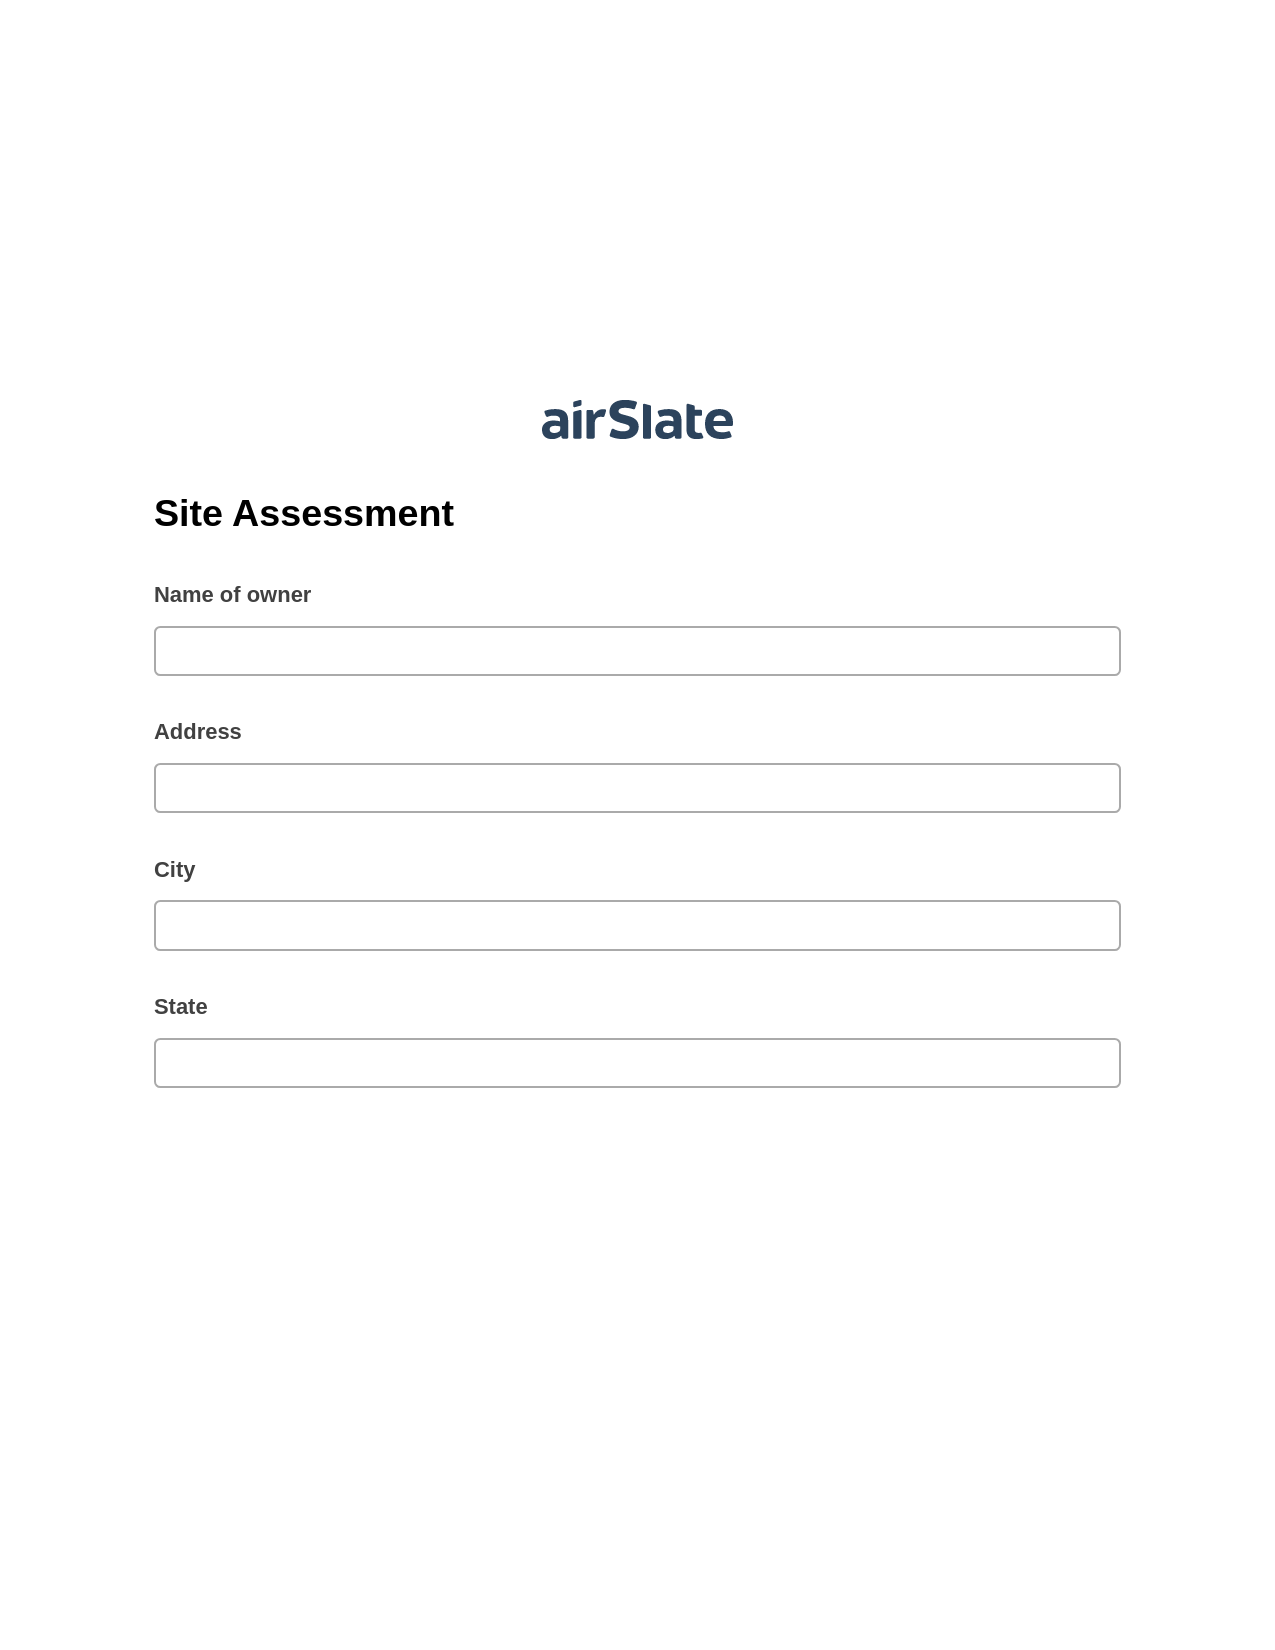 Site Assessment Pre-fill Slate from MS Dynamics 365 Records Bot, Update Salesforce Record Bot, Slack Two-Way Binding Bot